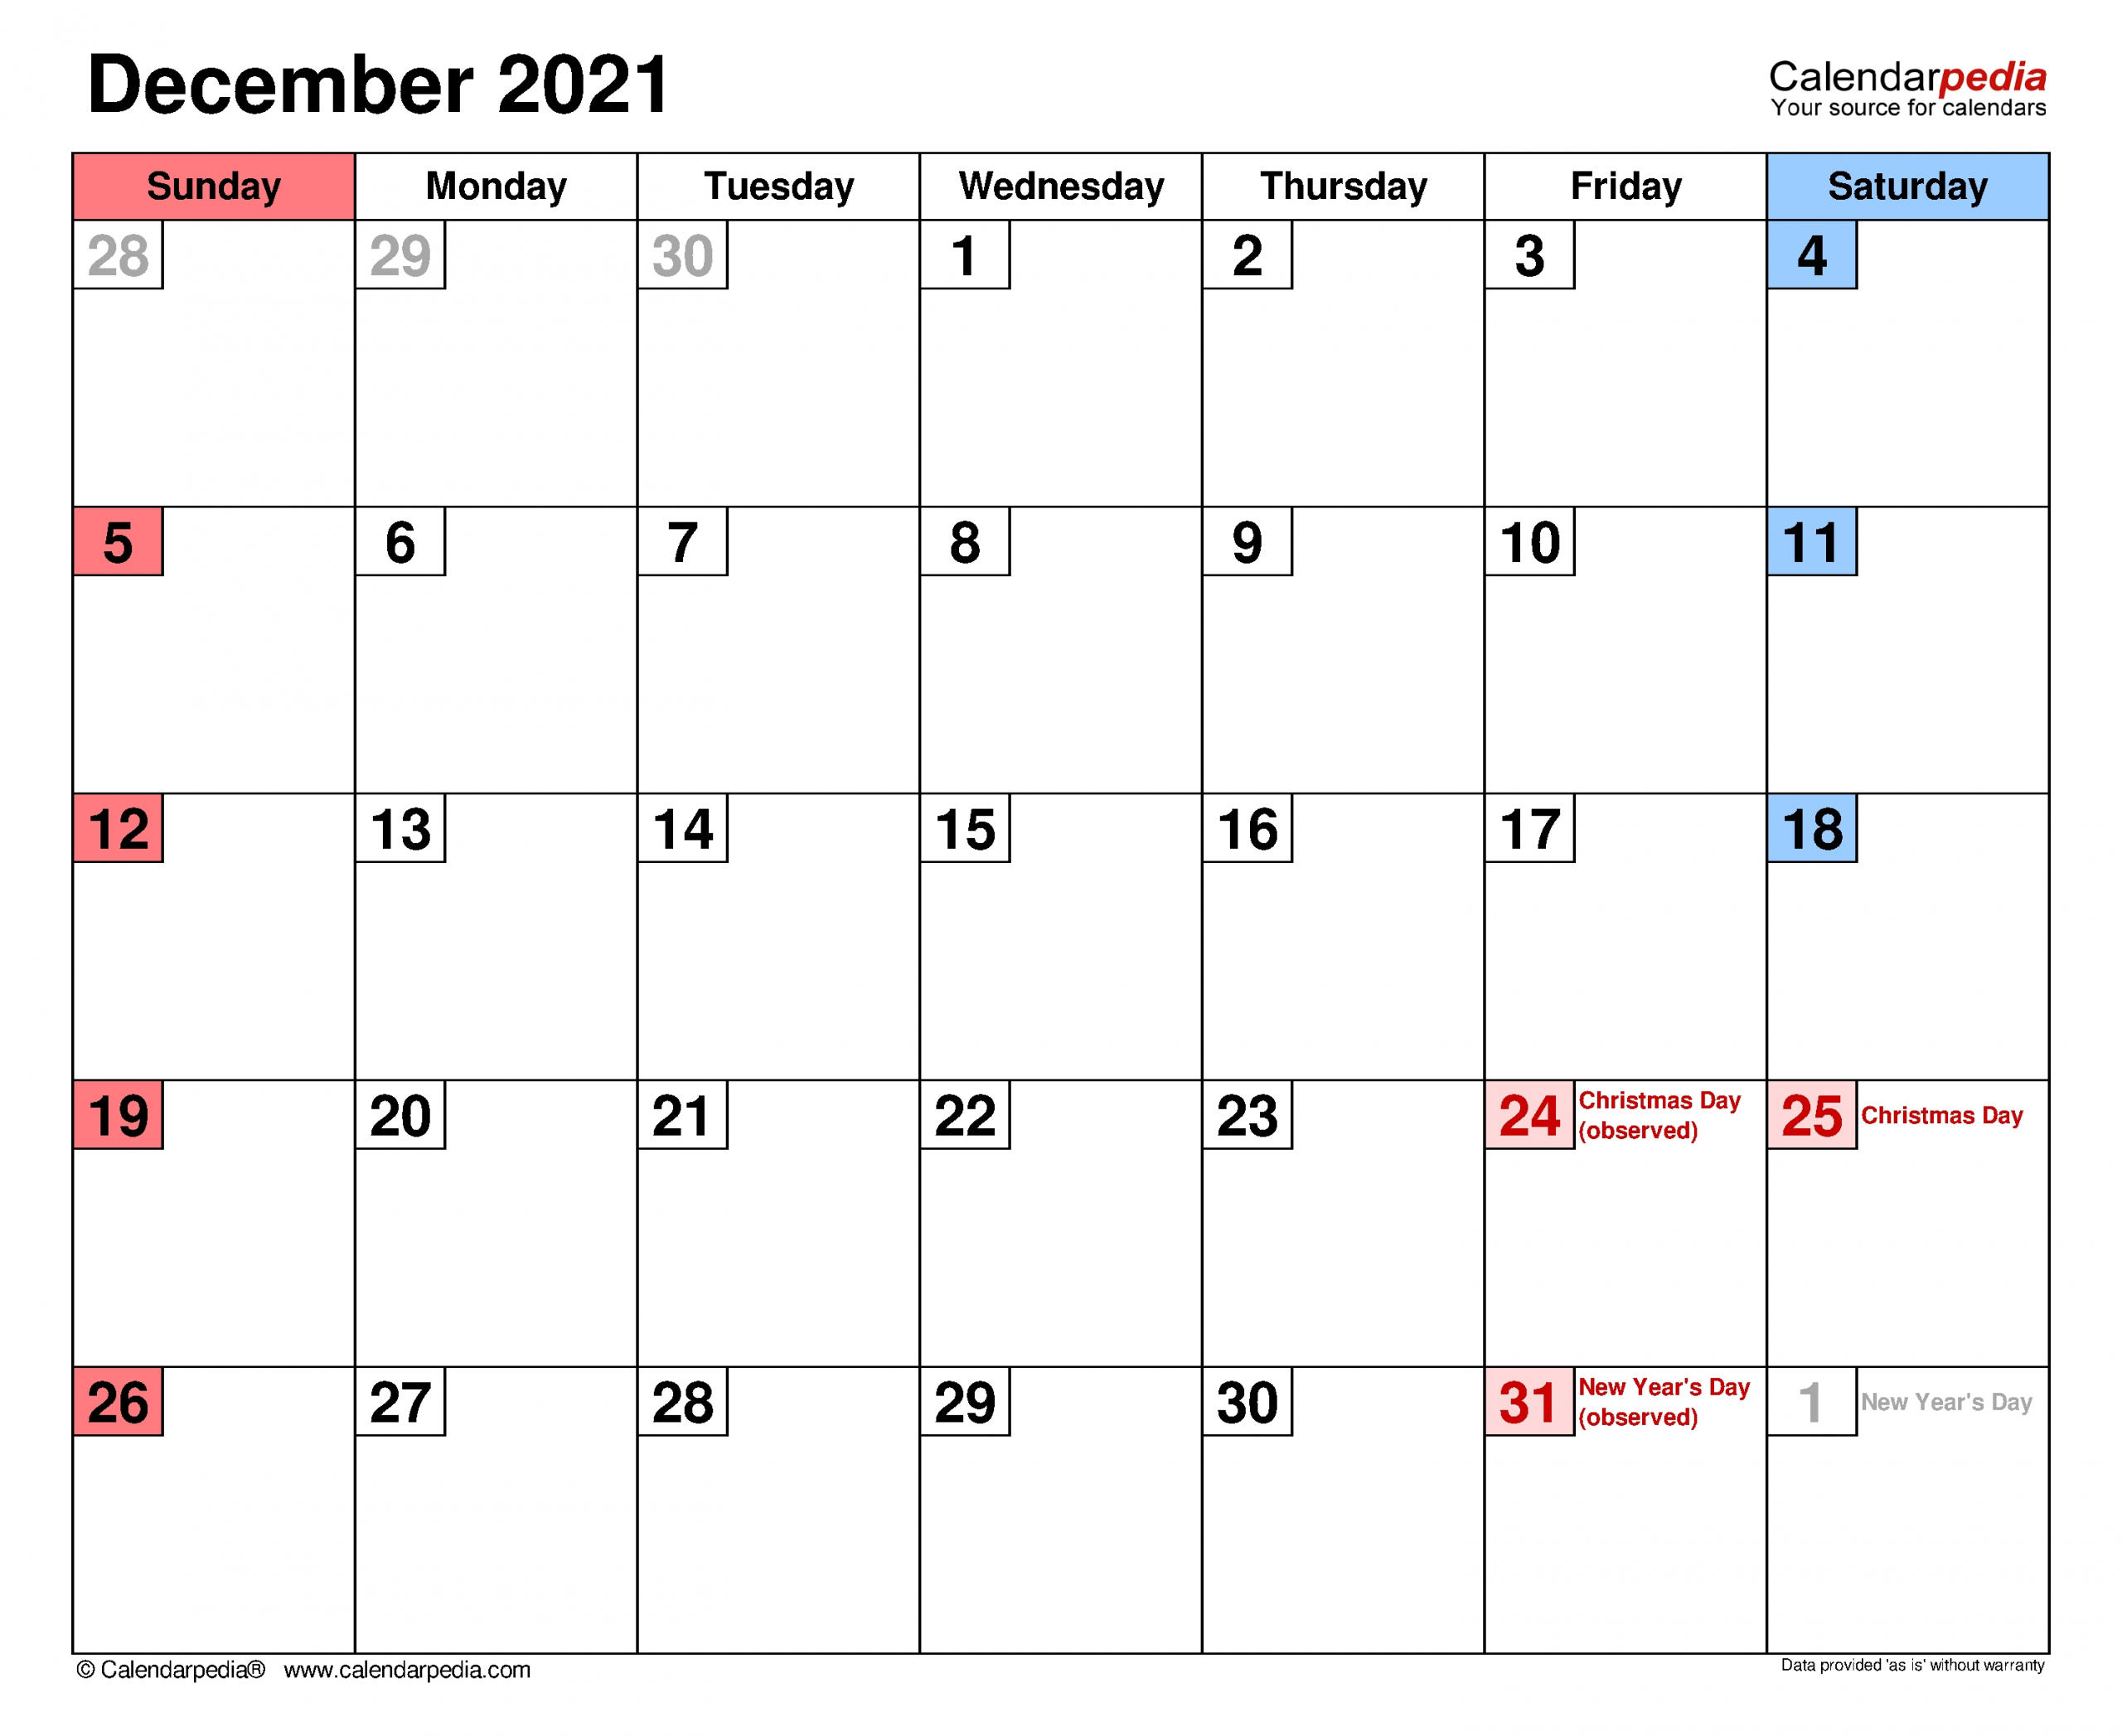 Collect December Calender Images 2021